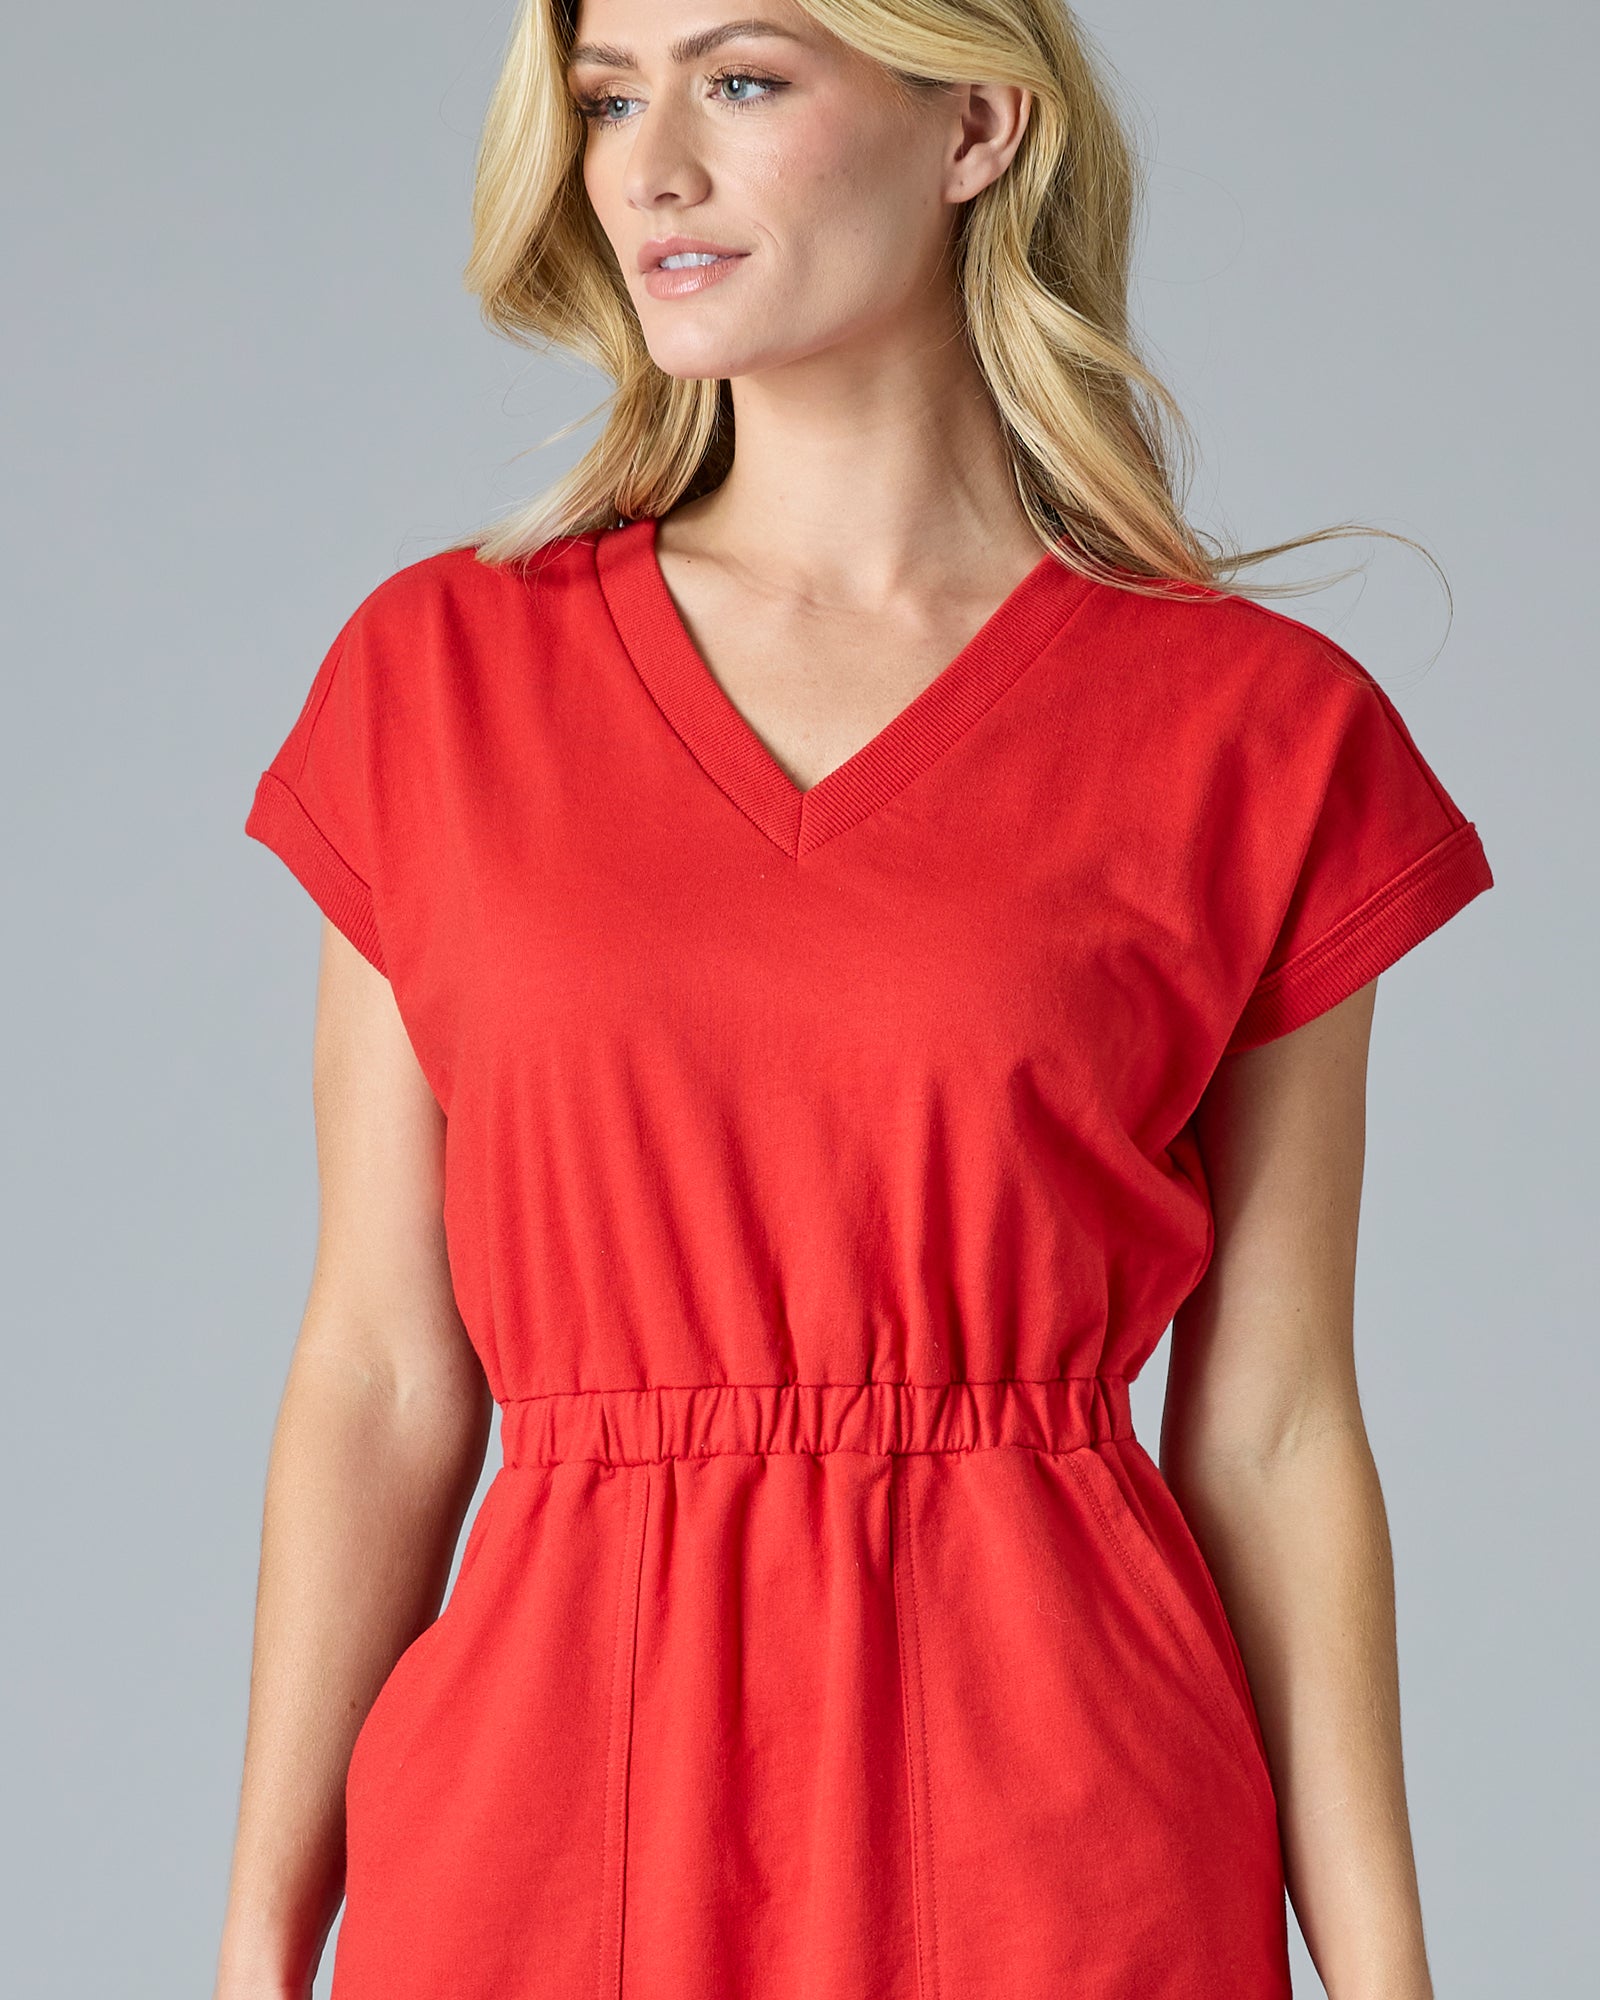 Woman in red short sleeve, knee-length dress with pockets